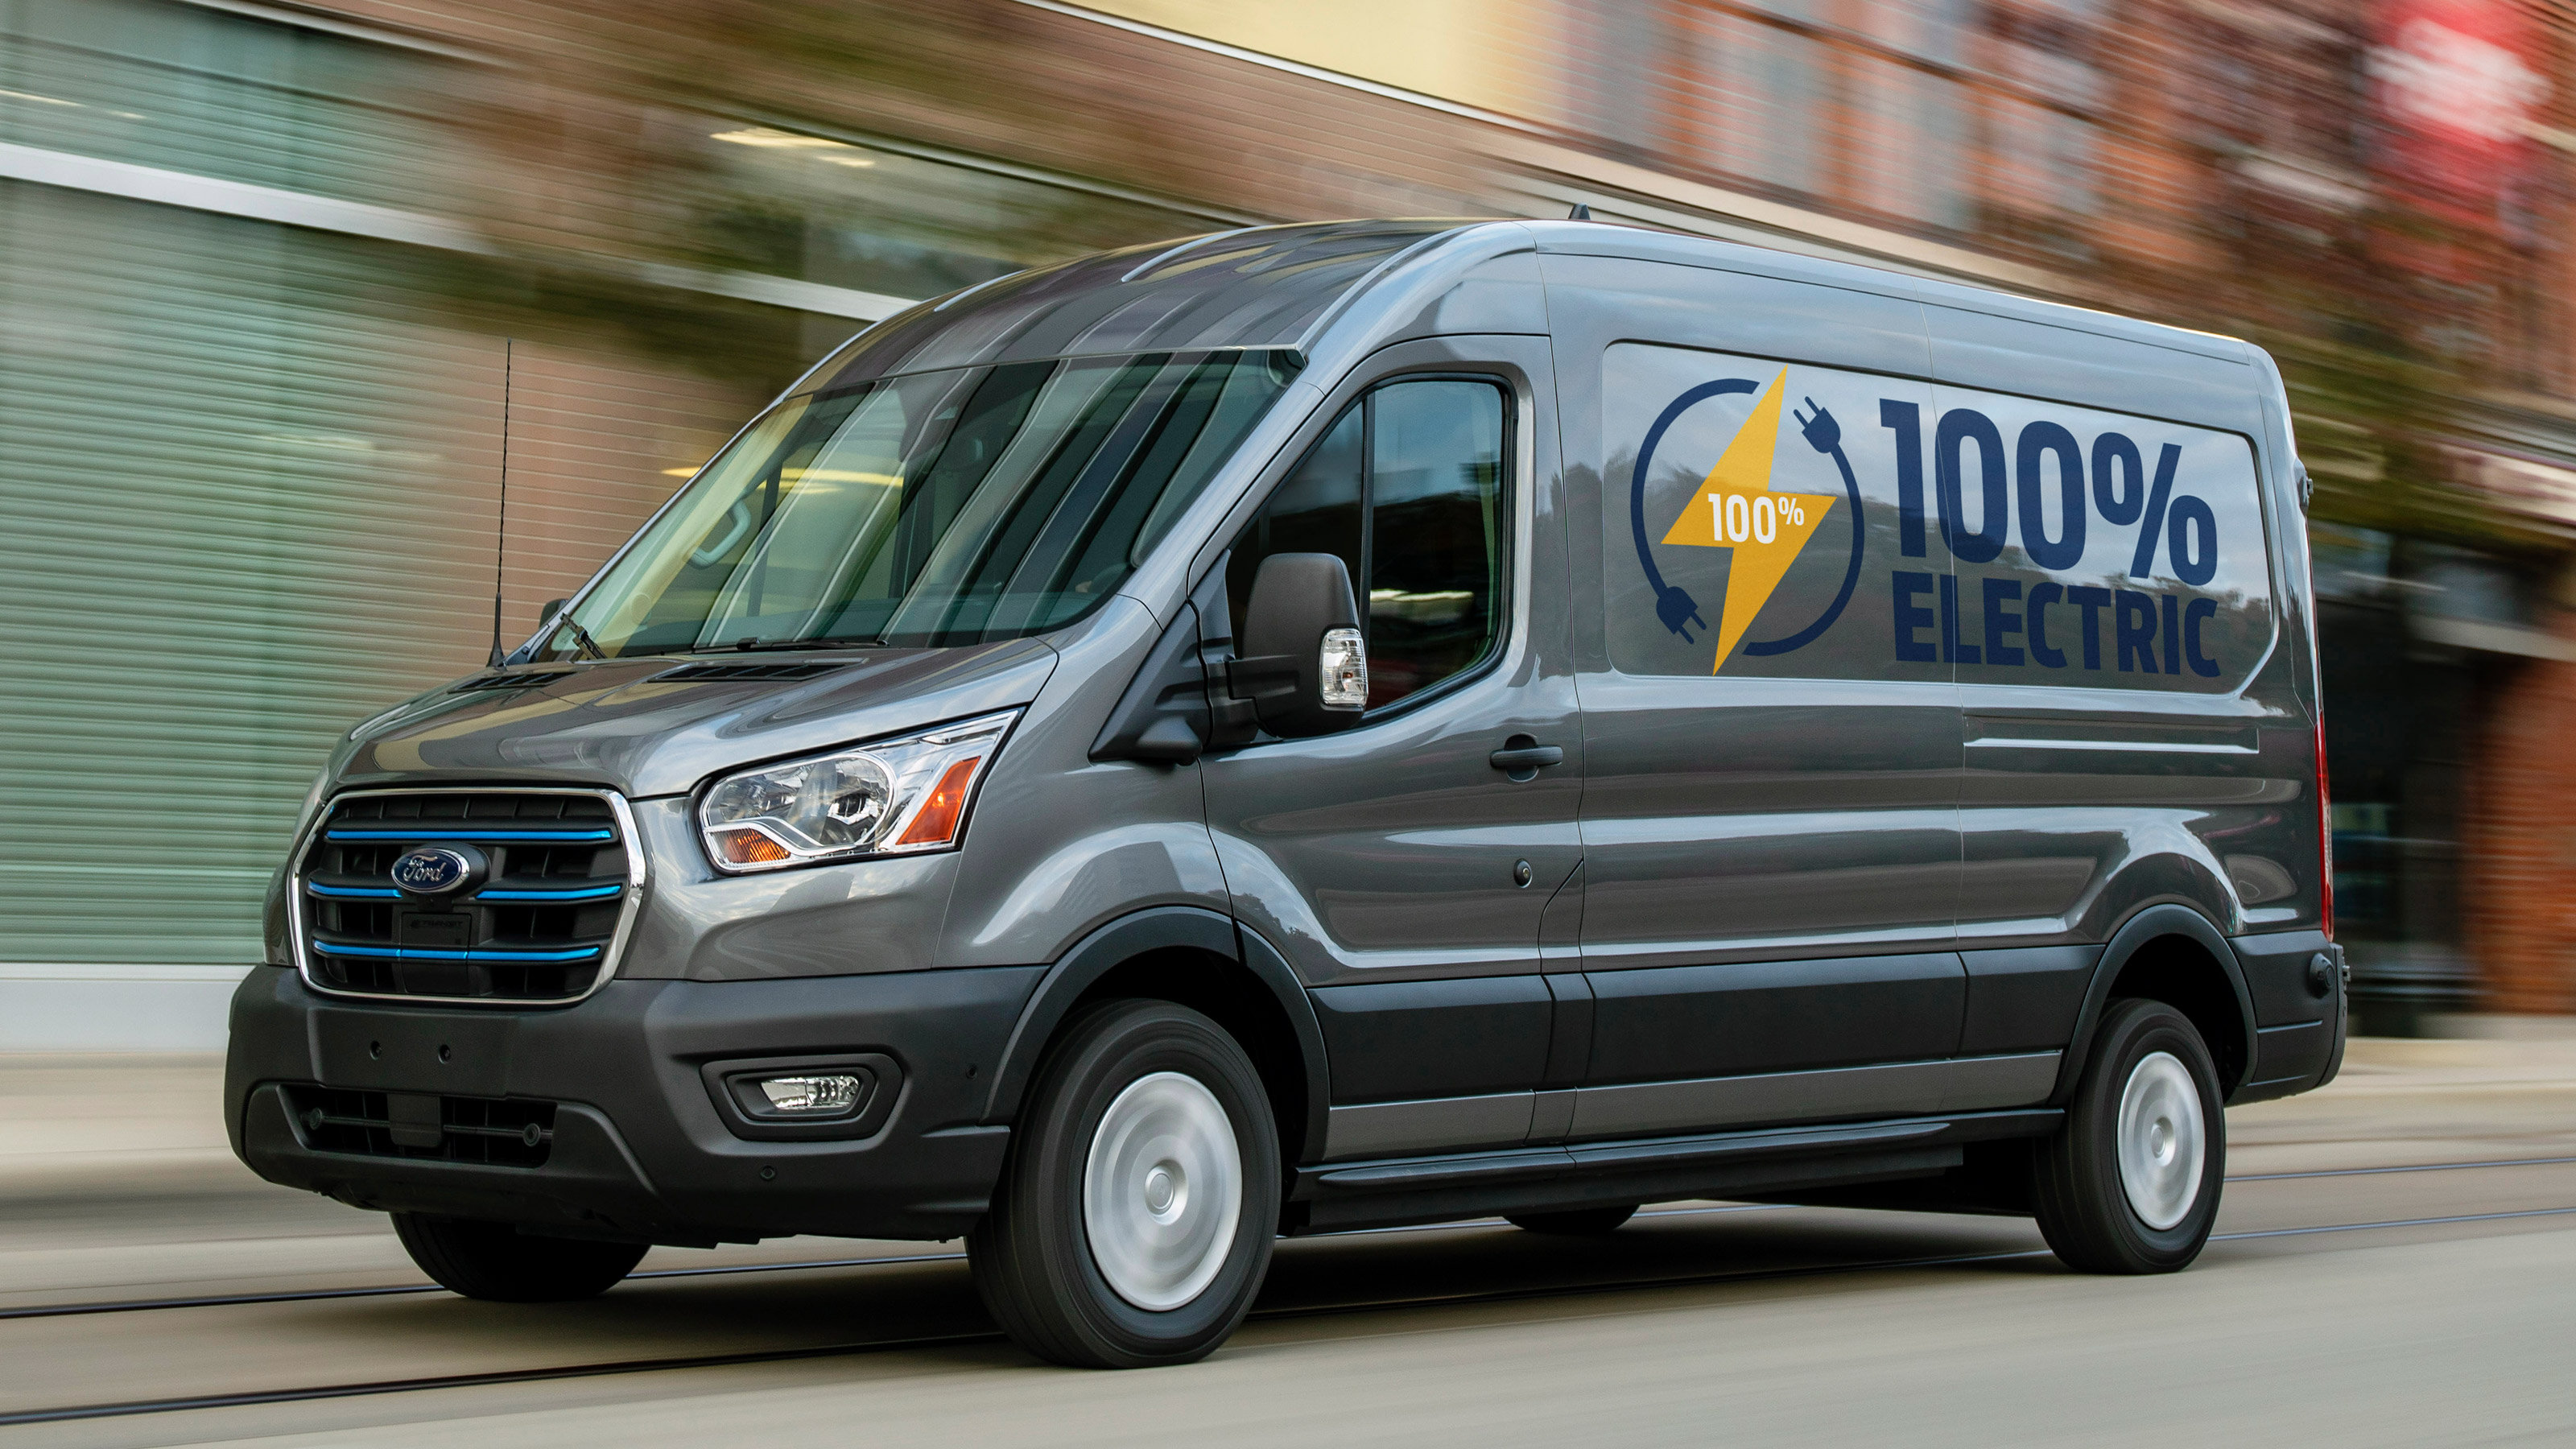 New all-electric Ford E-Transit van 